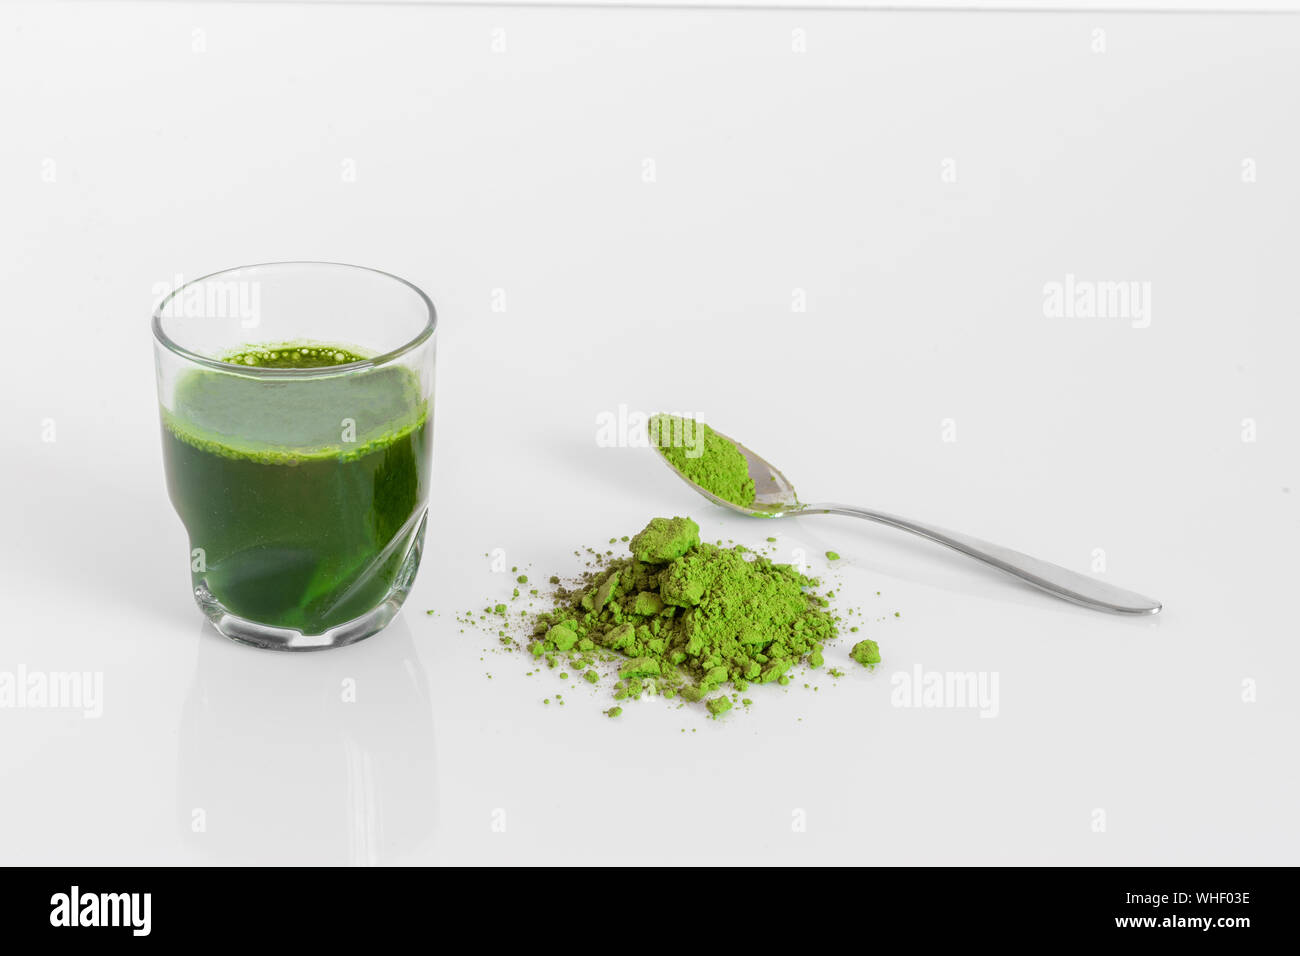 Wheatgrass powder and juice - claimed to be a superfood Stock Photo